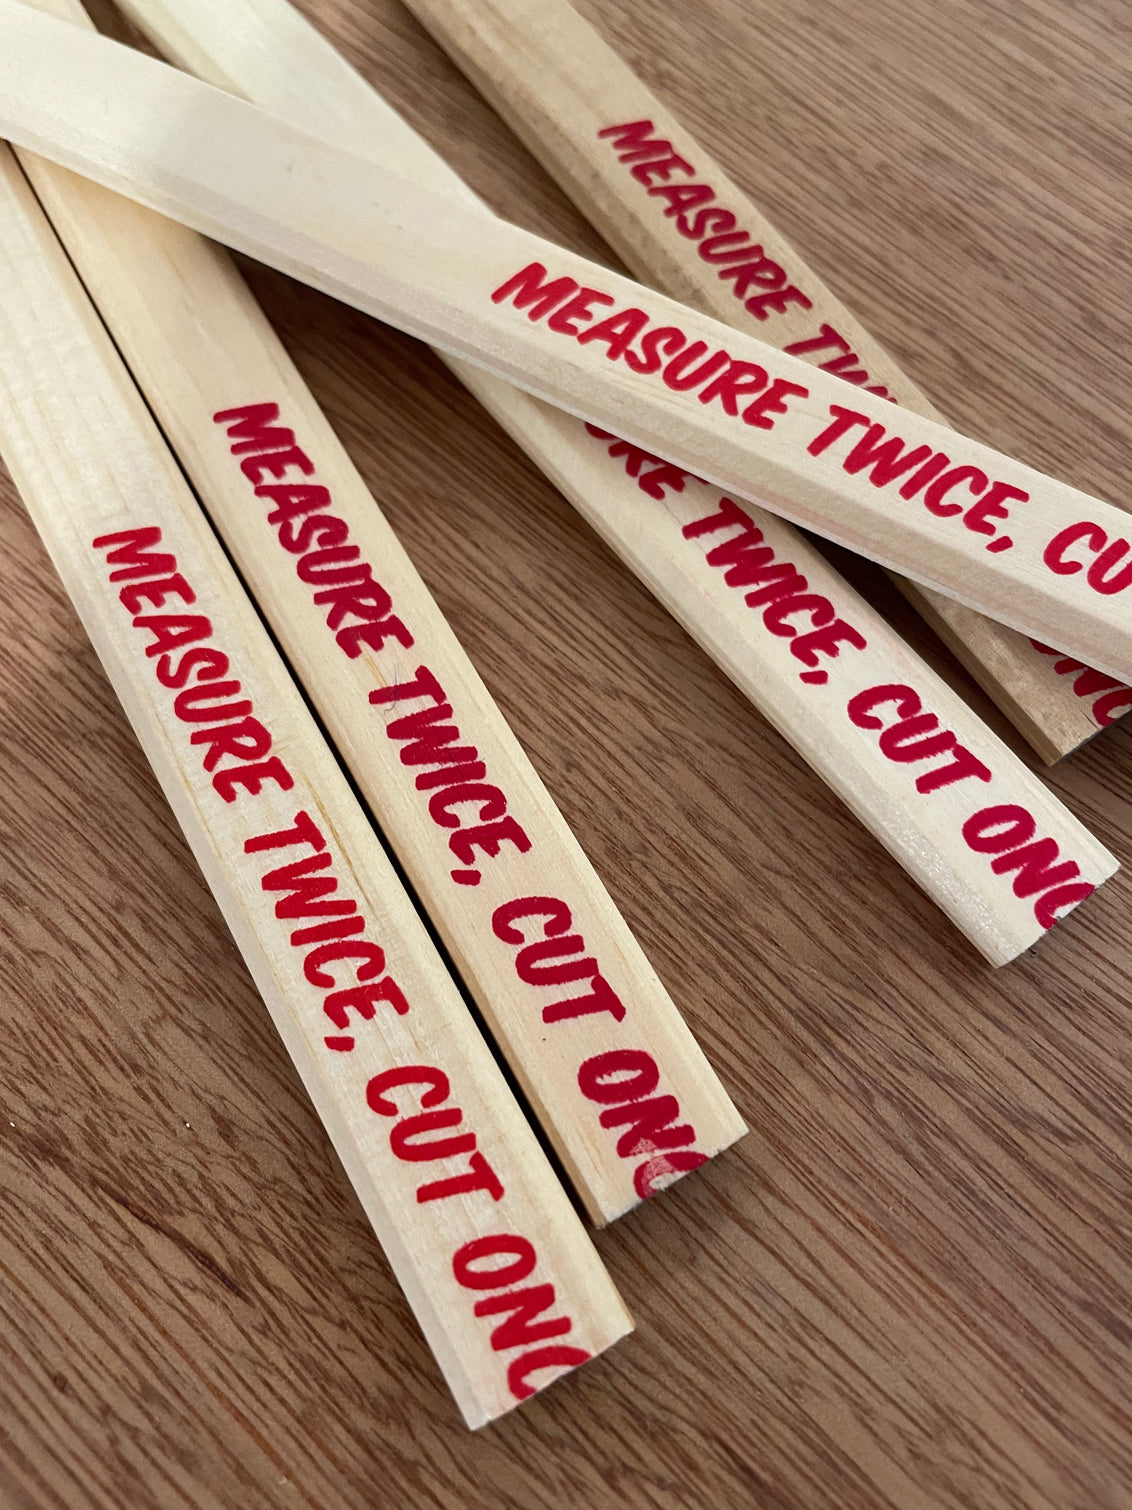 Wooden flat carpenters pencils laid on a wooden table showing the unsharpened end, with the lead within. The pencils have a slogan Measure Twice Cut Once screenprinted in red ink - the joke is that last word has been cut off, or mispositioned. 